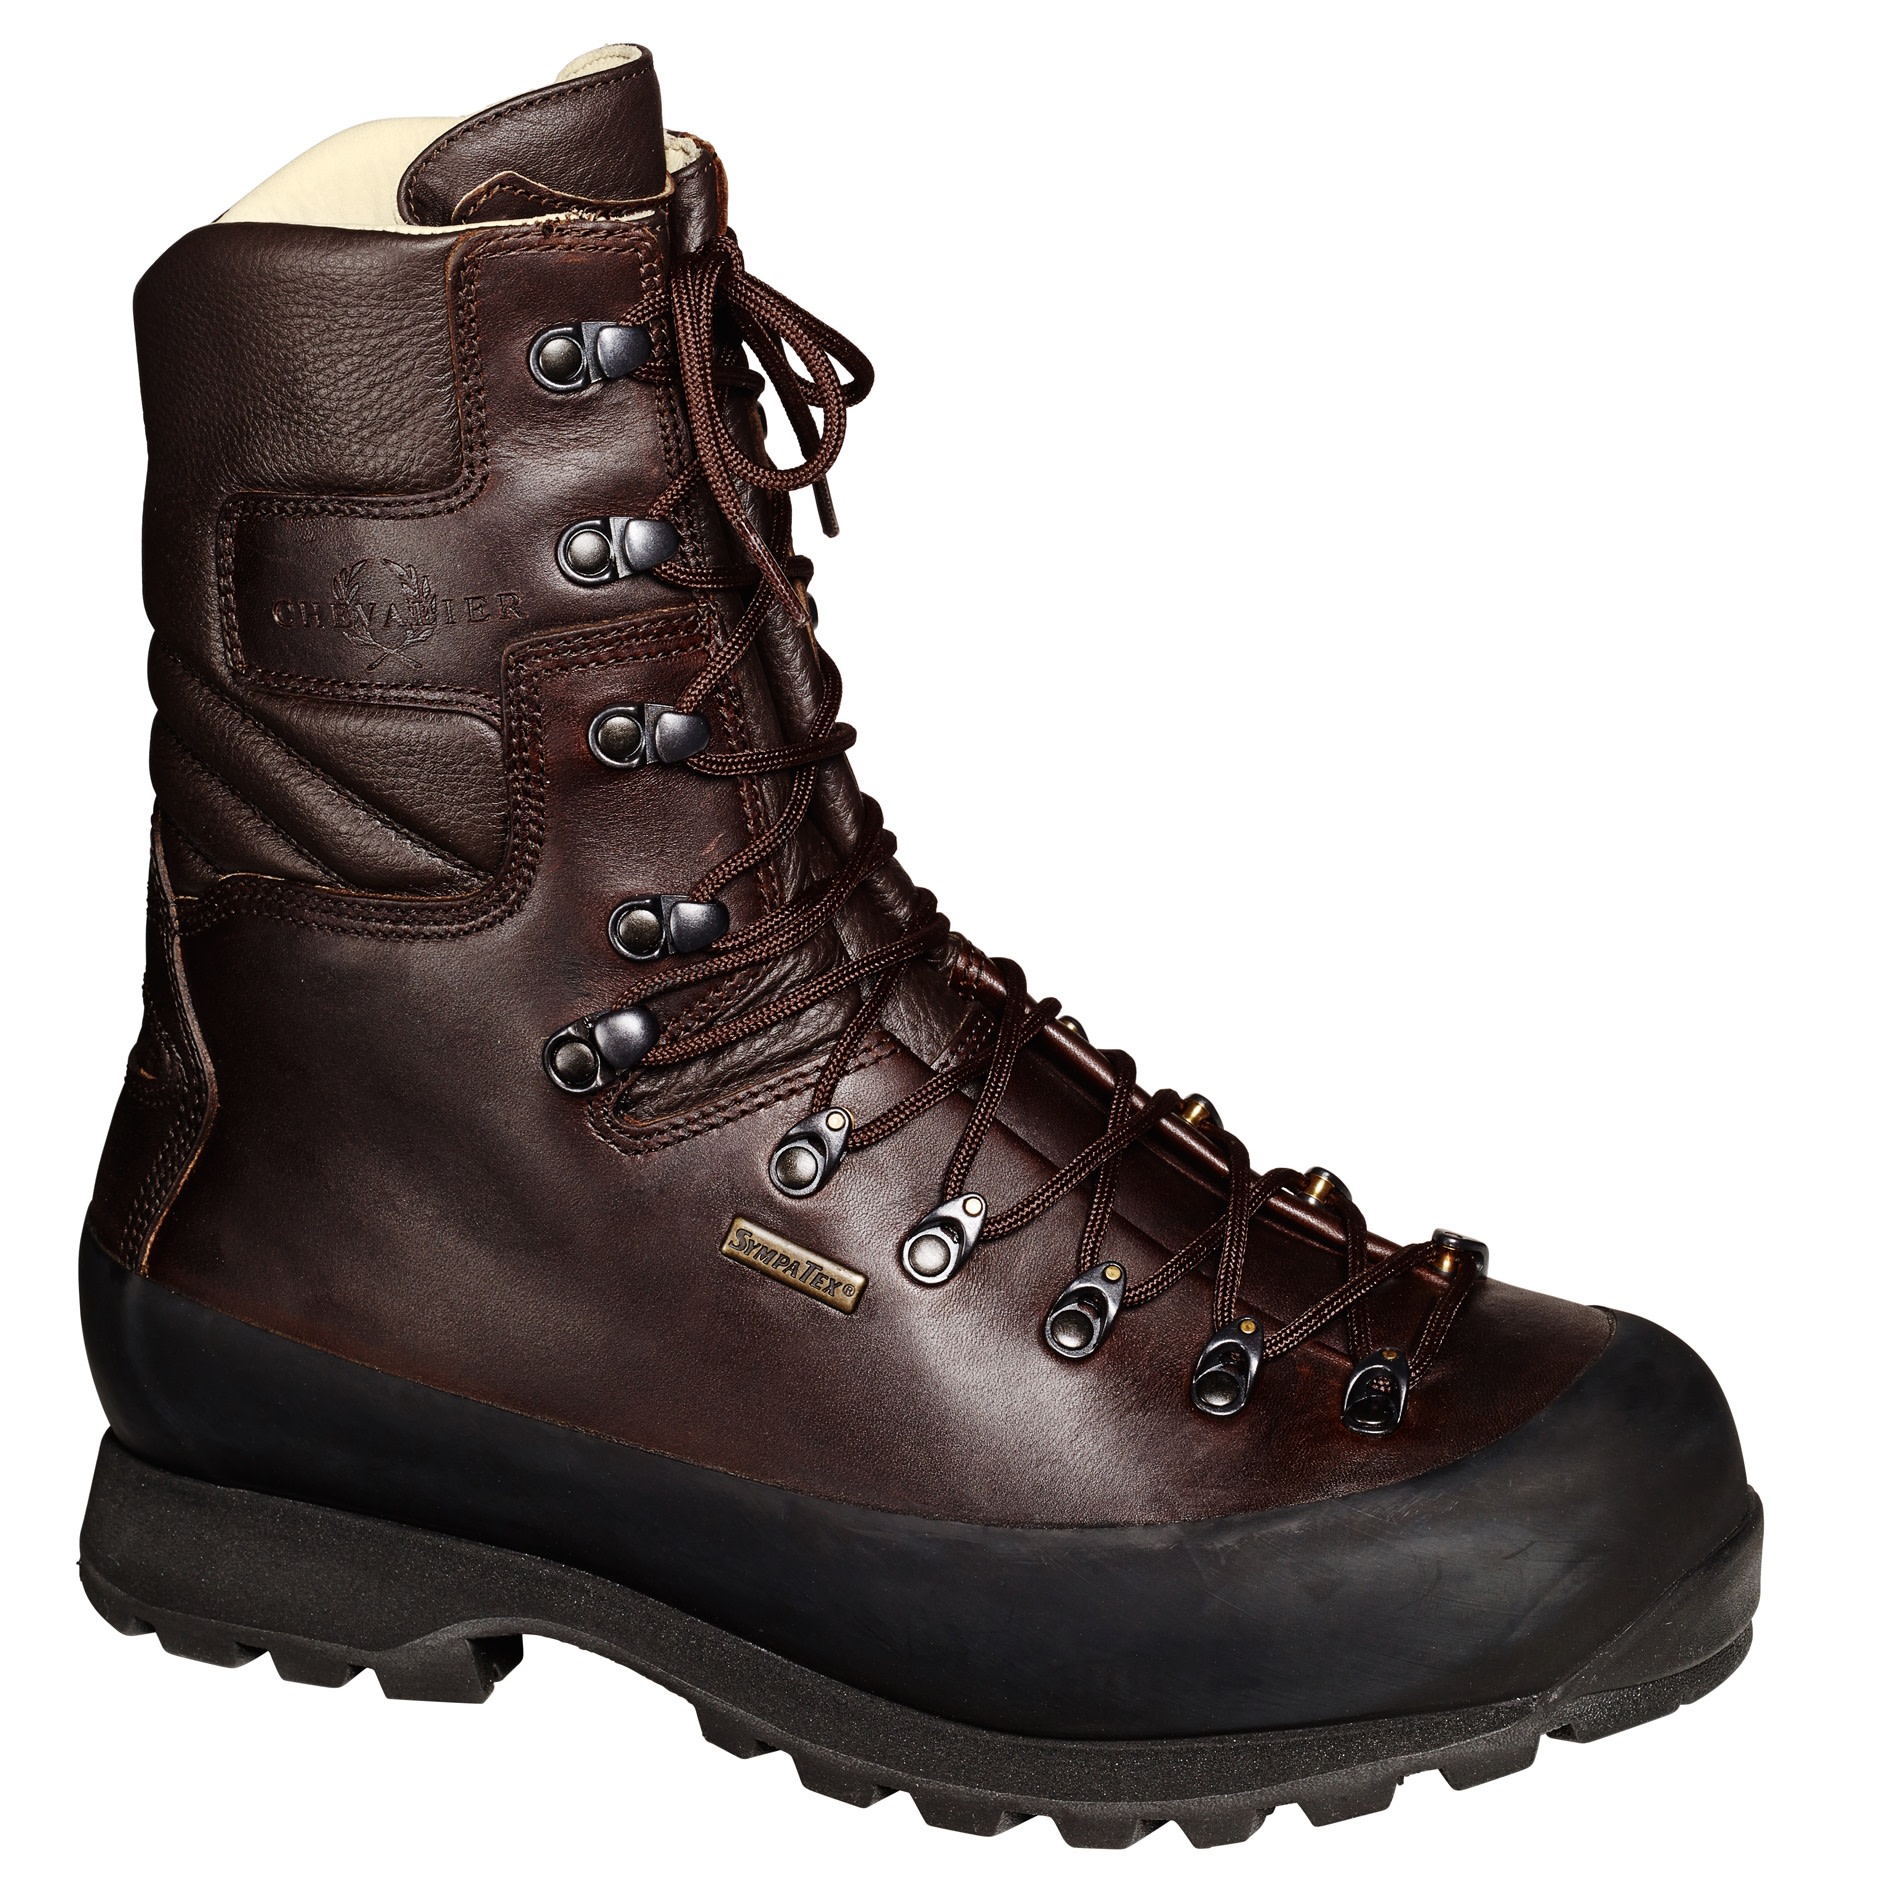 Chevalier Tundra Boot with Sympatex Brown